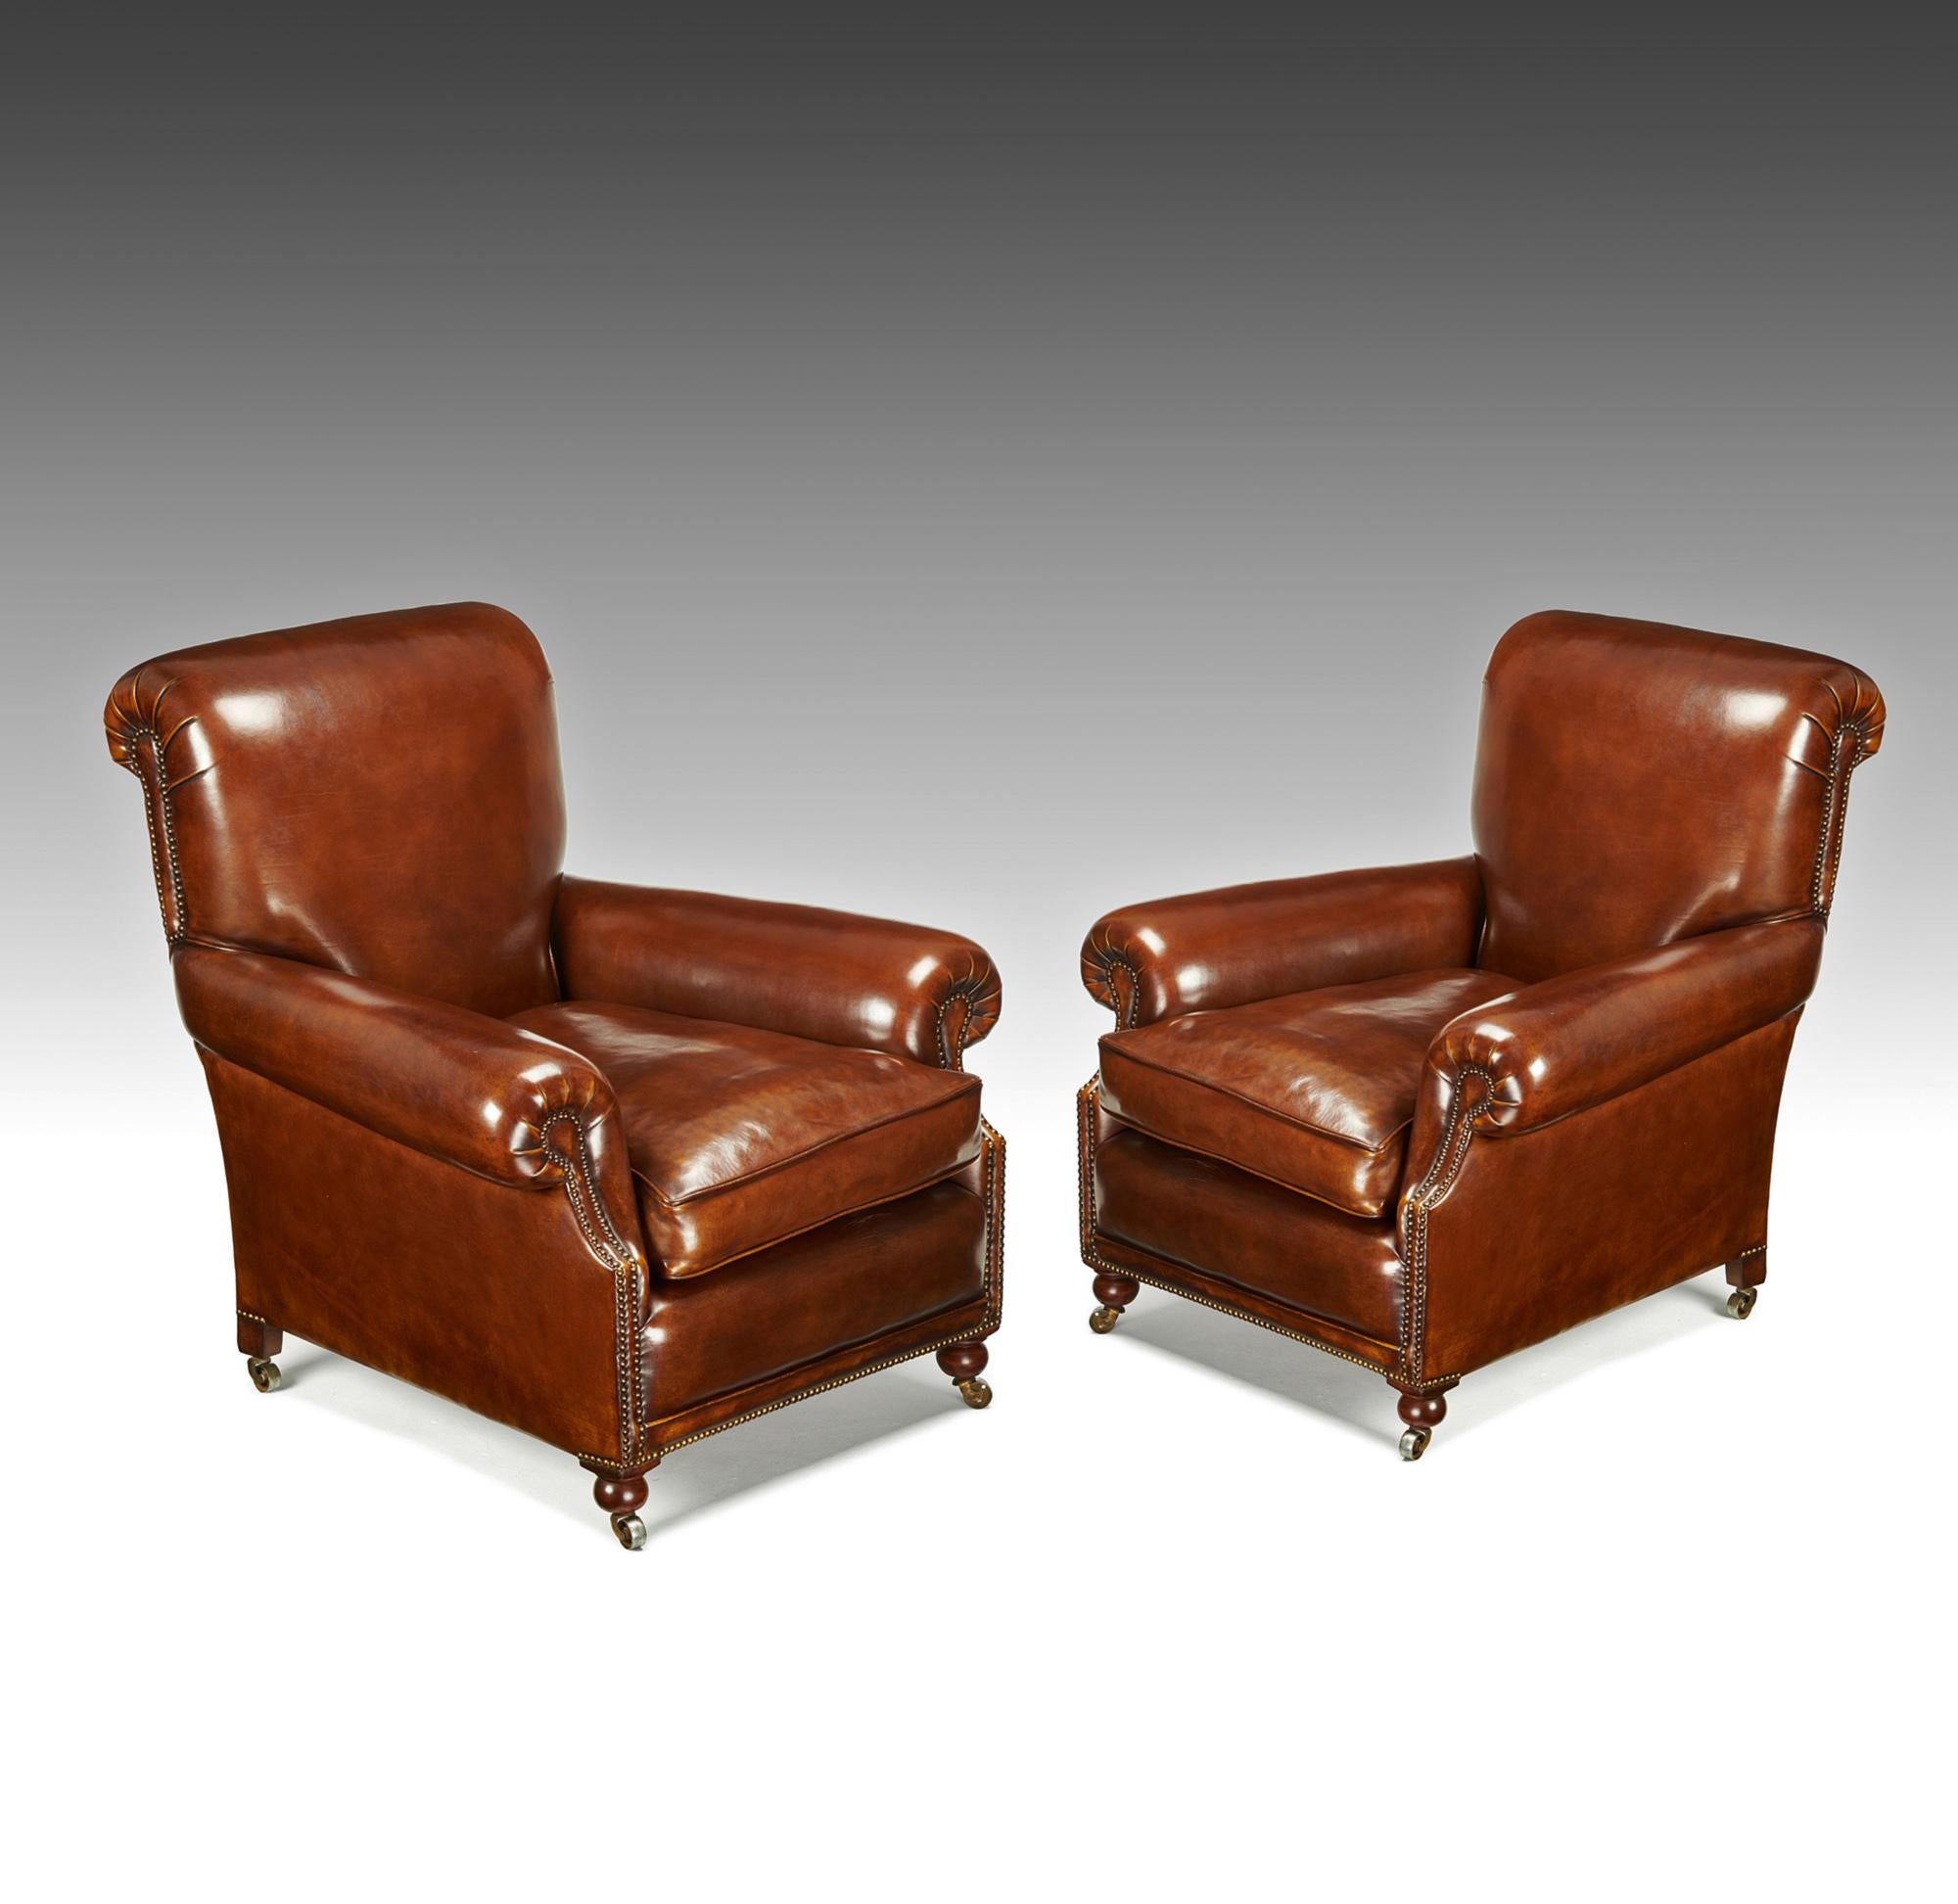 English Fine Pair of Victorian Antique Leather Club Chairs